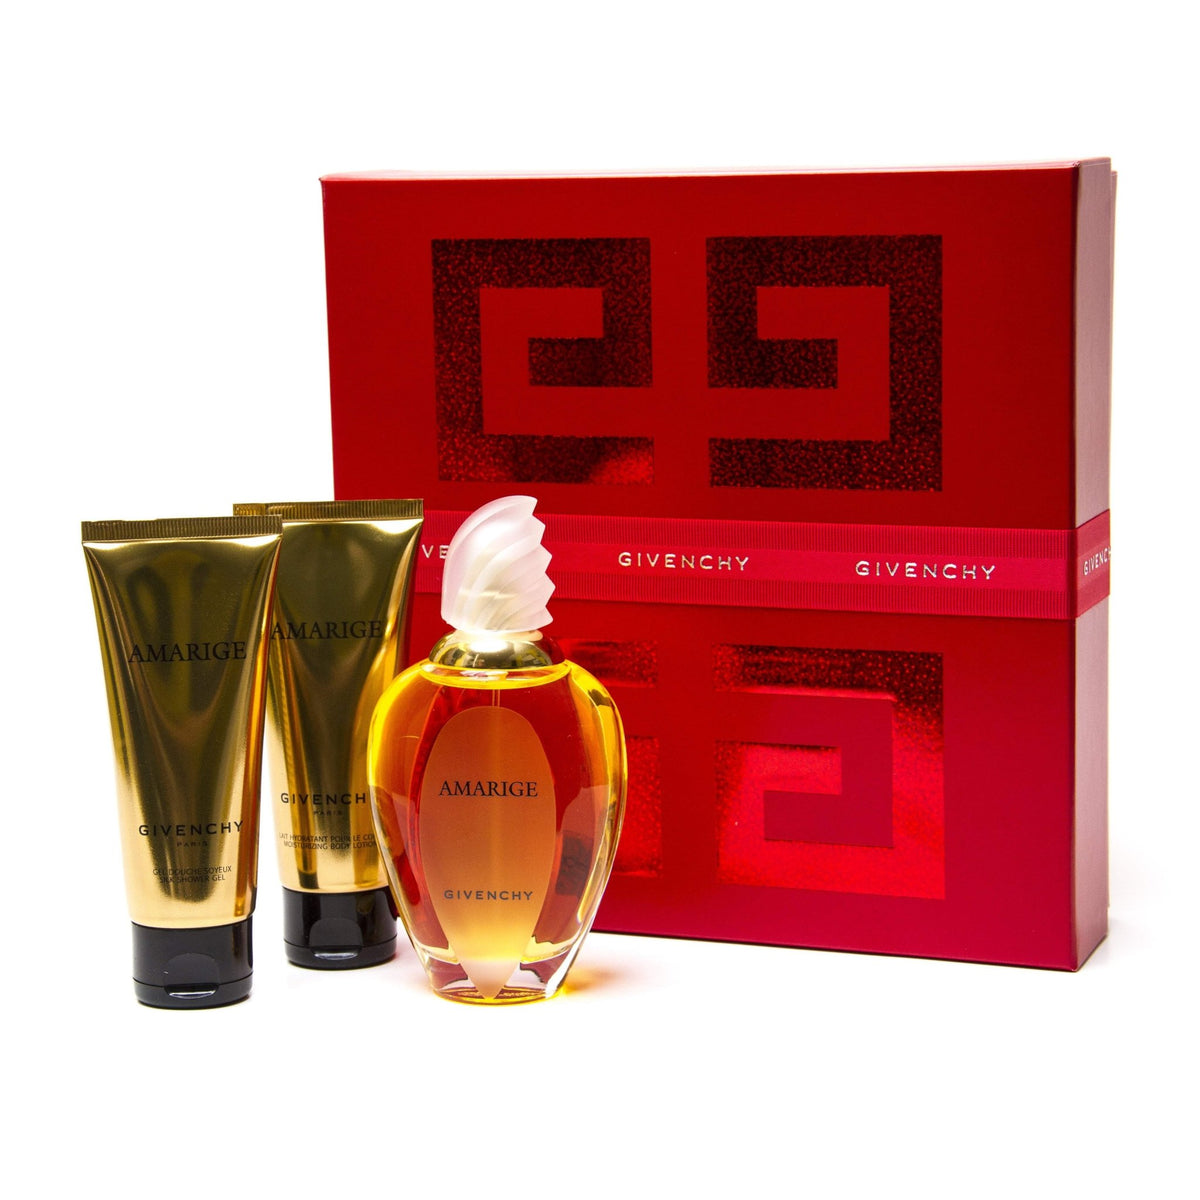 Amarige Gift Set for Women by Givenchy